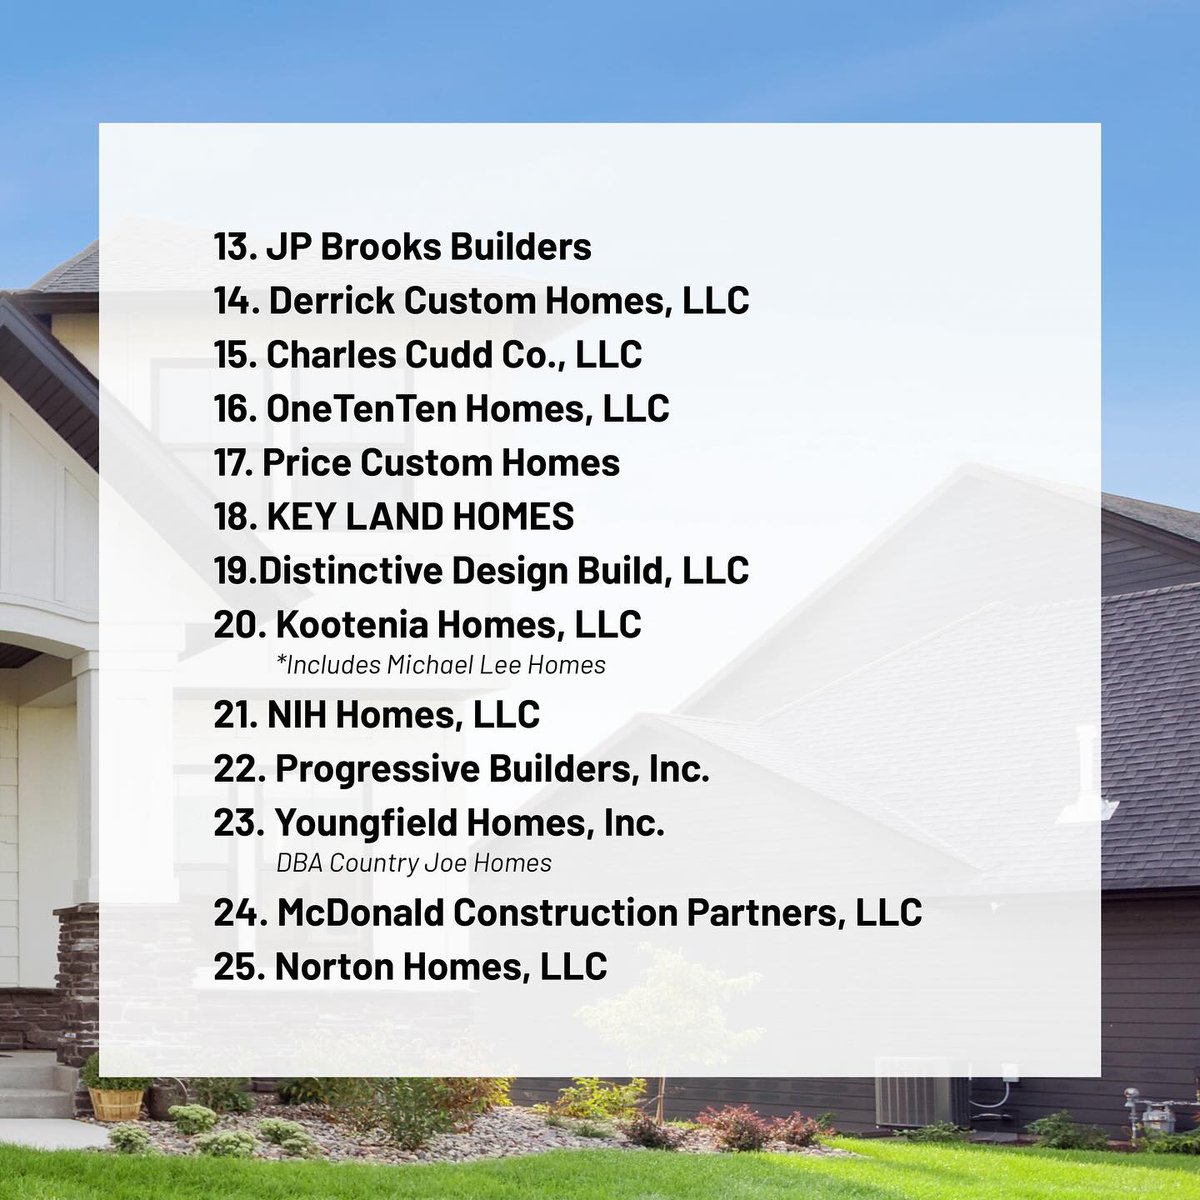 The Top 25 Builders of 2023 list from @HousingFirstMN is here! Congratulations to our very own @RobThomasHOMES on being #7 🙌 And a special shout out to all the other build partners that our TRADITION entities work with that made this year's list! Well deserved 🙌